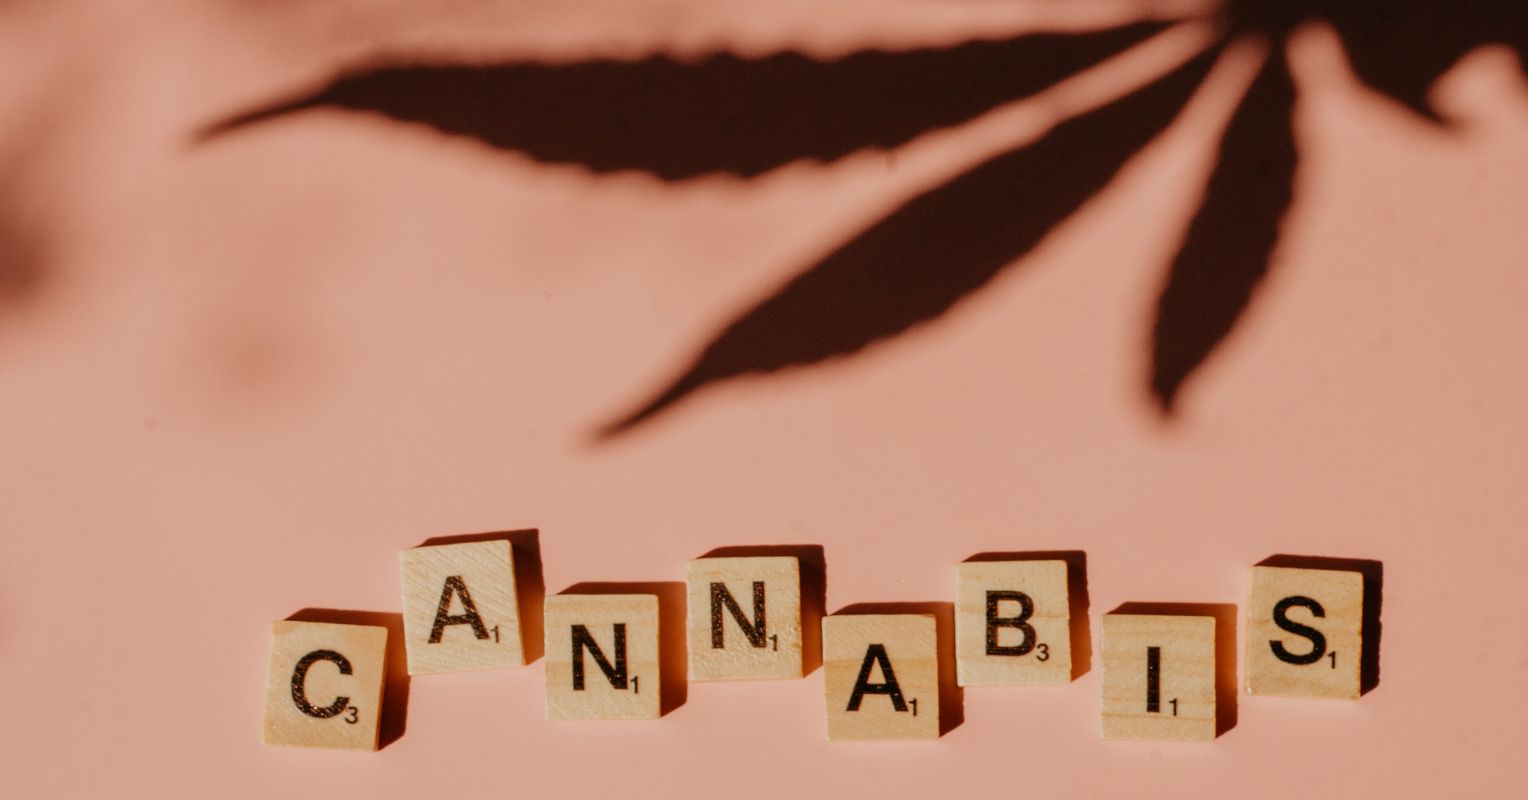 Which Personality Traits Increase Problematic Marijuana Use?